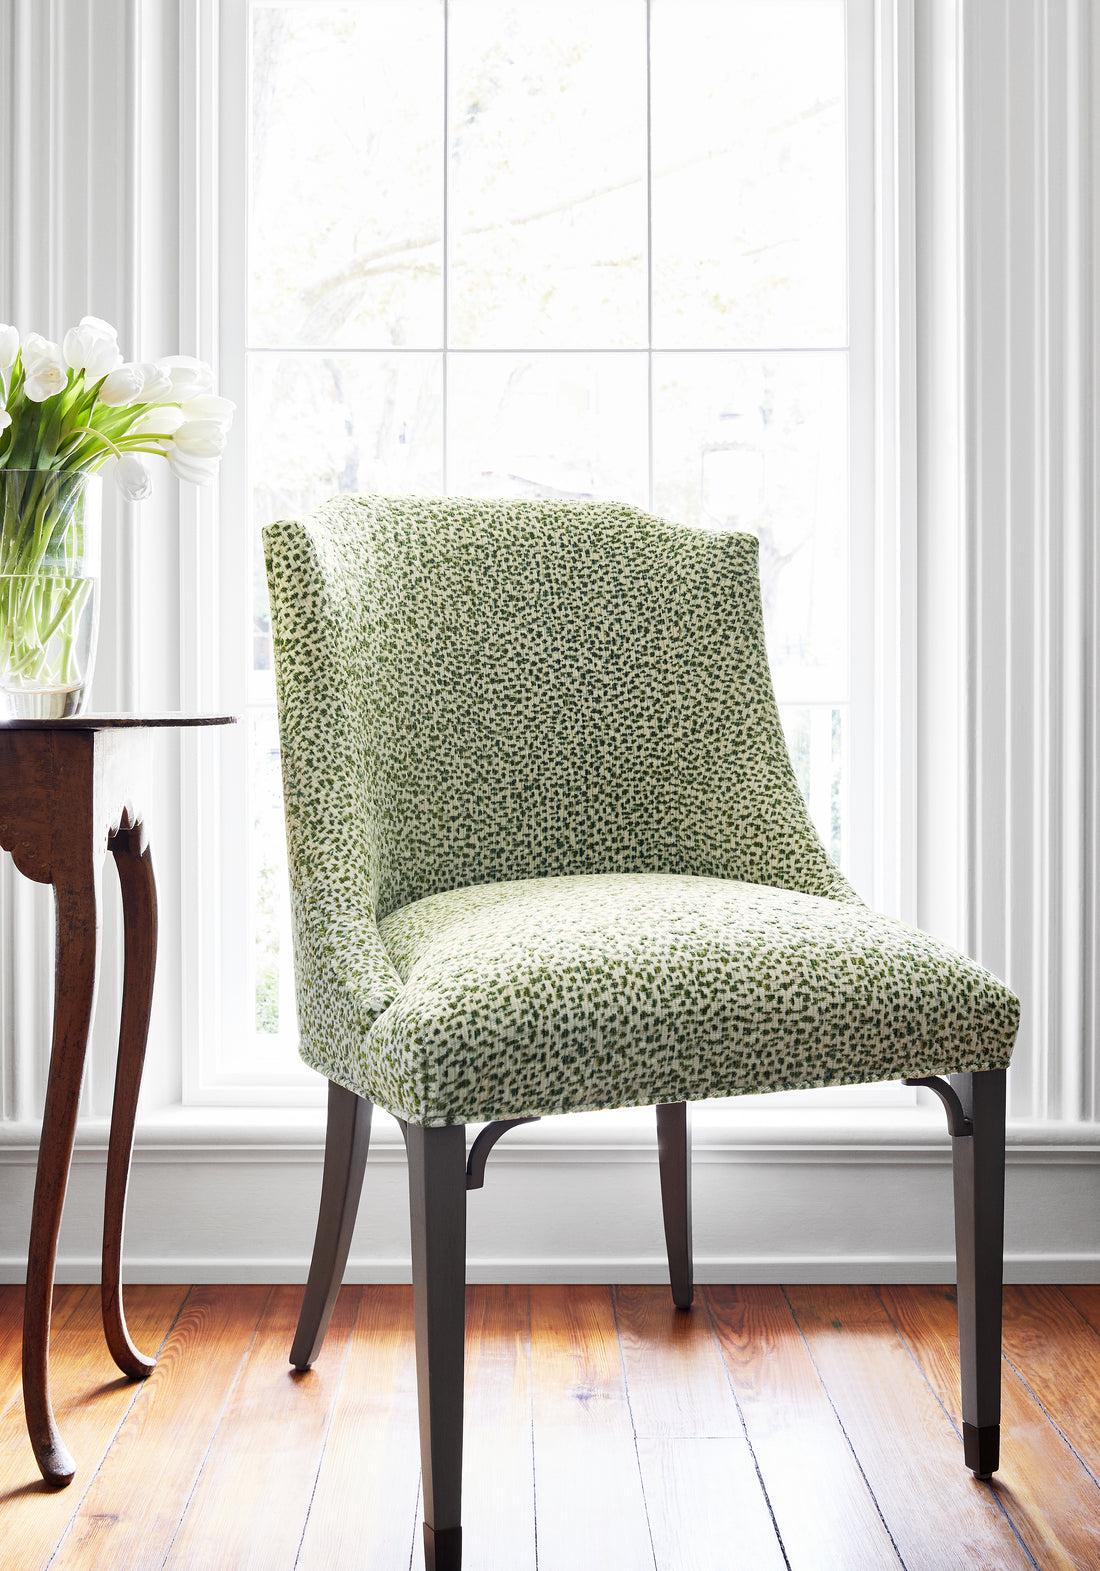 Bailey Dining Chair in Swing Velvet woven fabric in emerald color - pattern number W72801 - by Thibaut in the Woven Resource Vol 13 Fusion Velvets collection